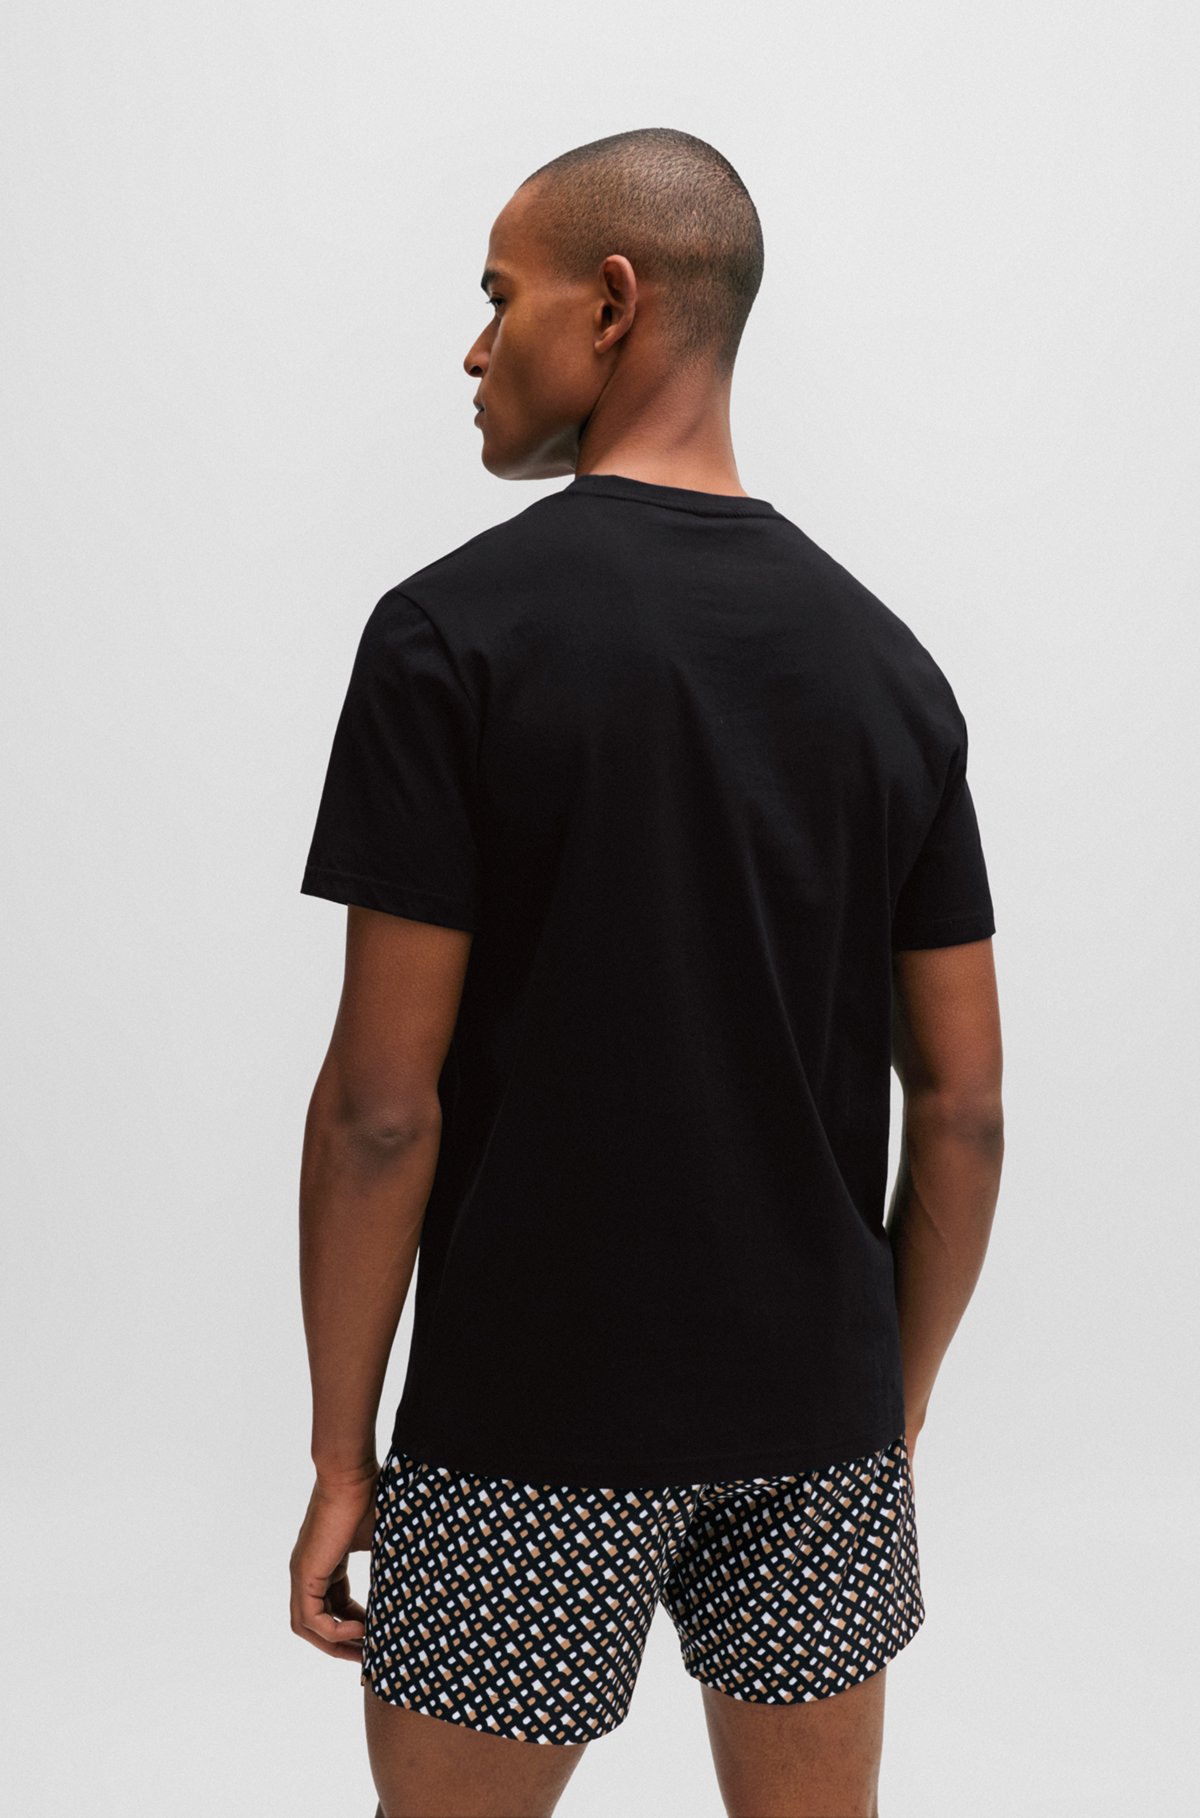 Cotton T-shirt with contrast logo, Black